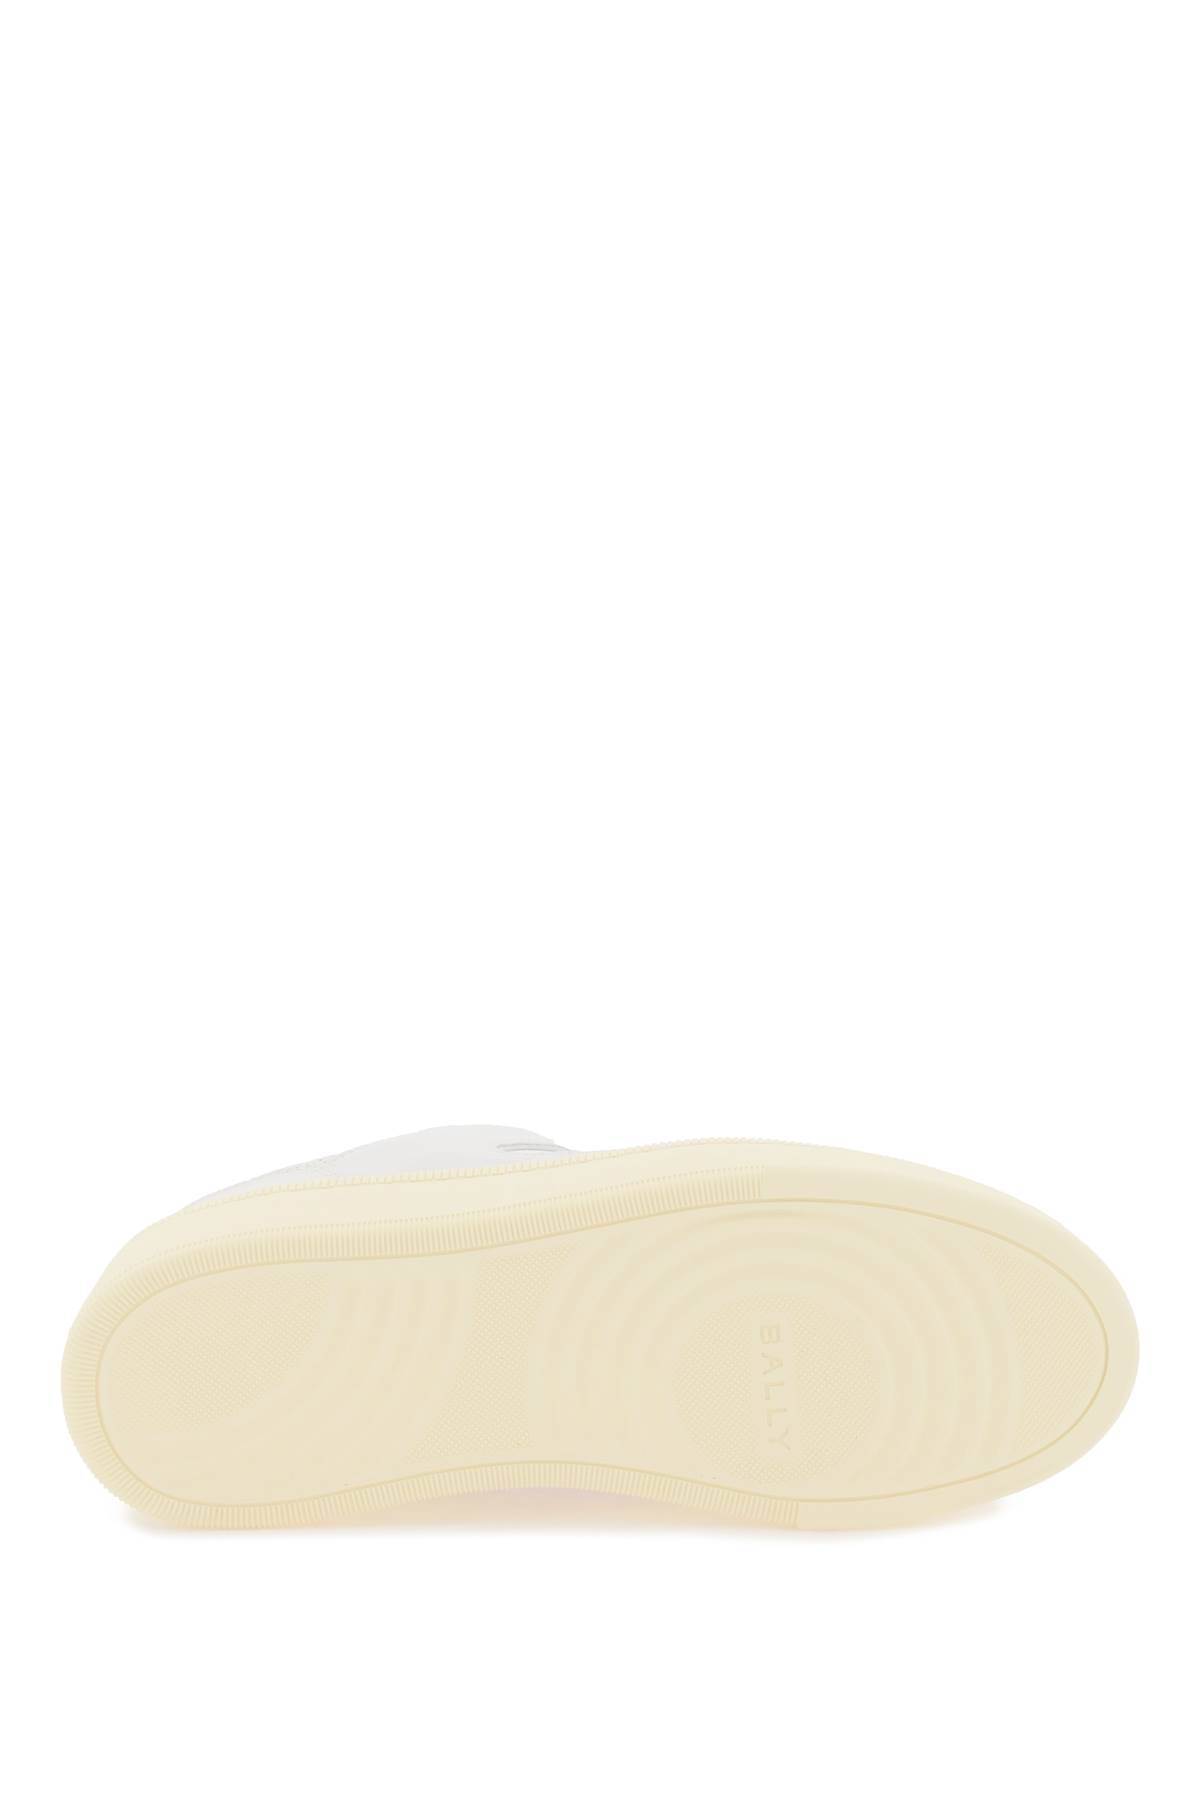 Shop Bally Leather Riweira Sneakers In White,pink